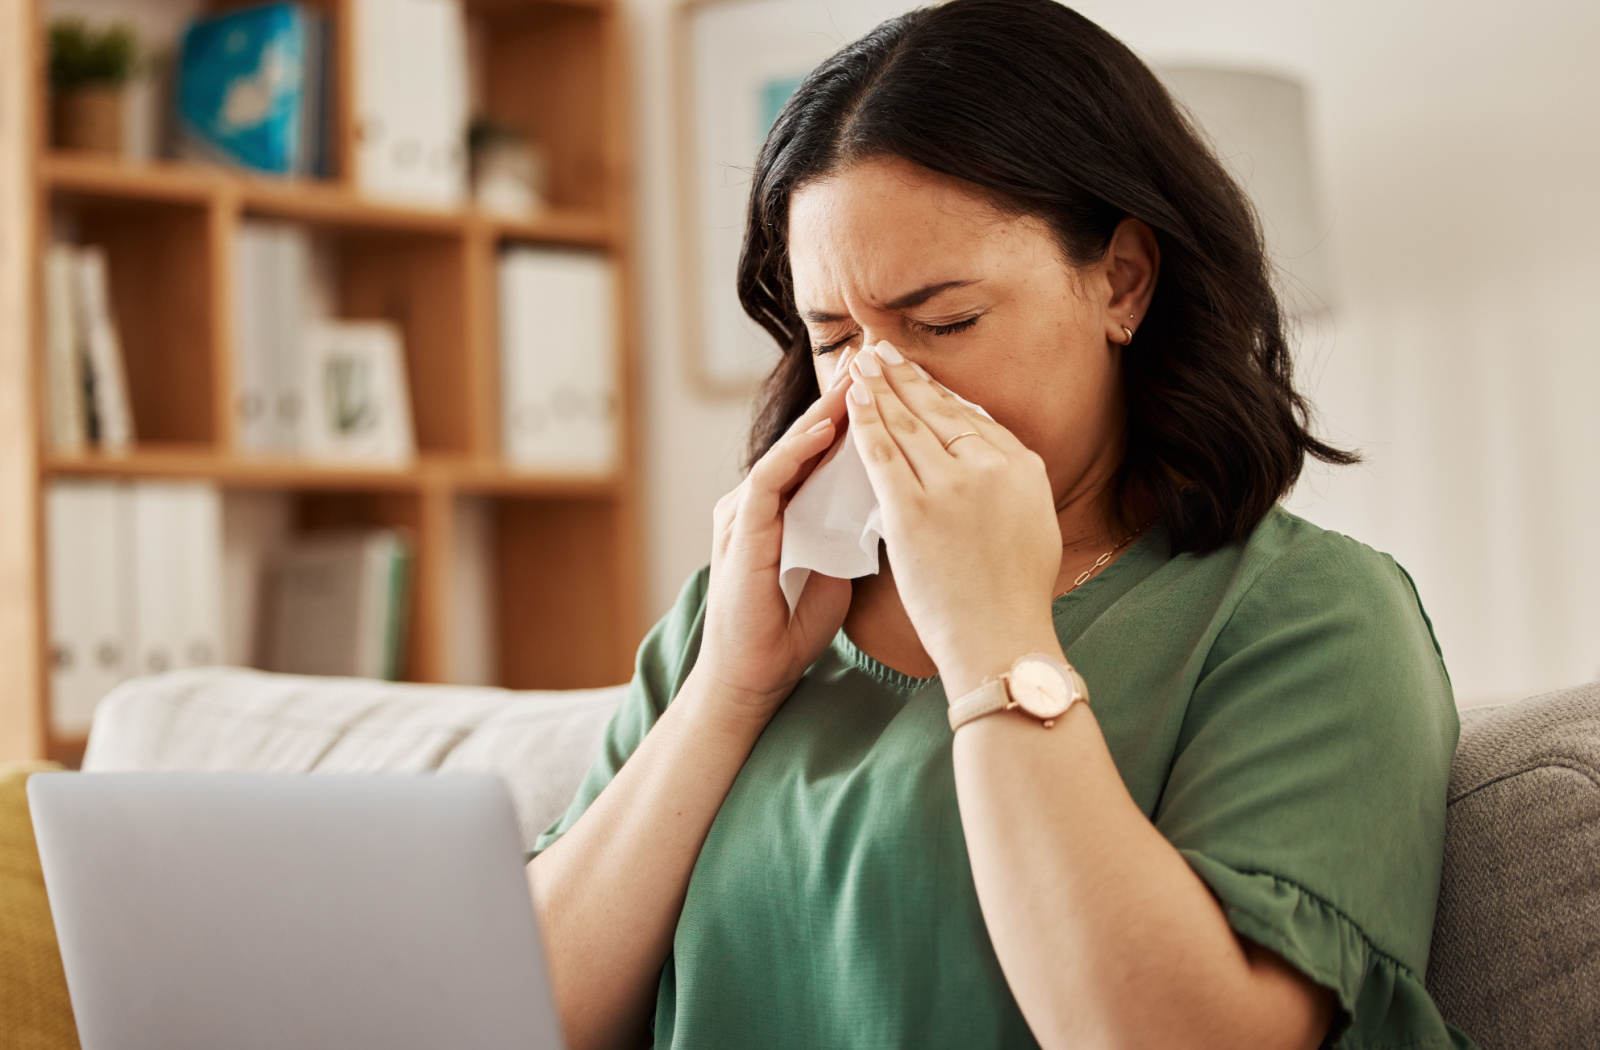 A woman suffering from sinus infections blowing her nose.